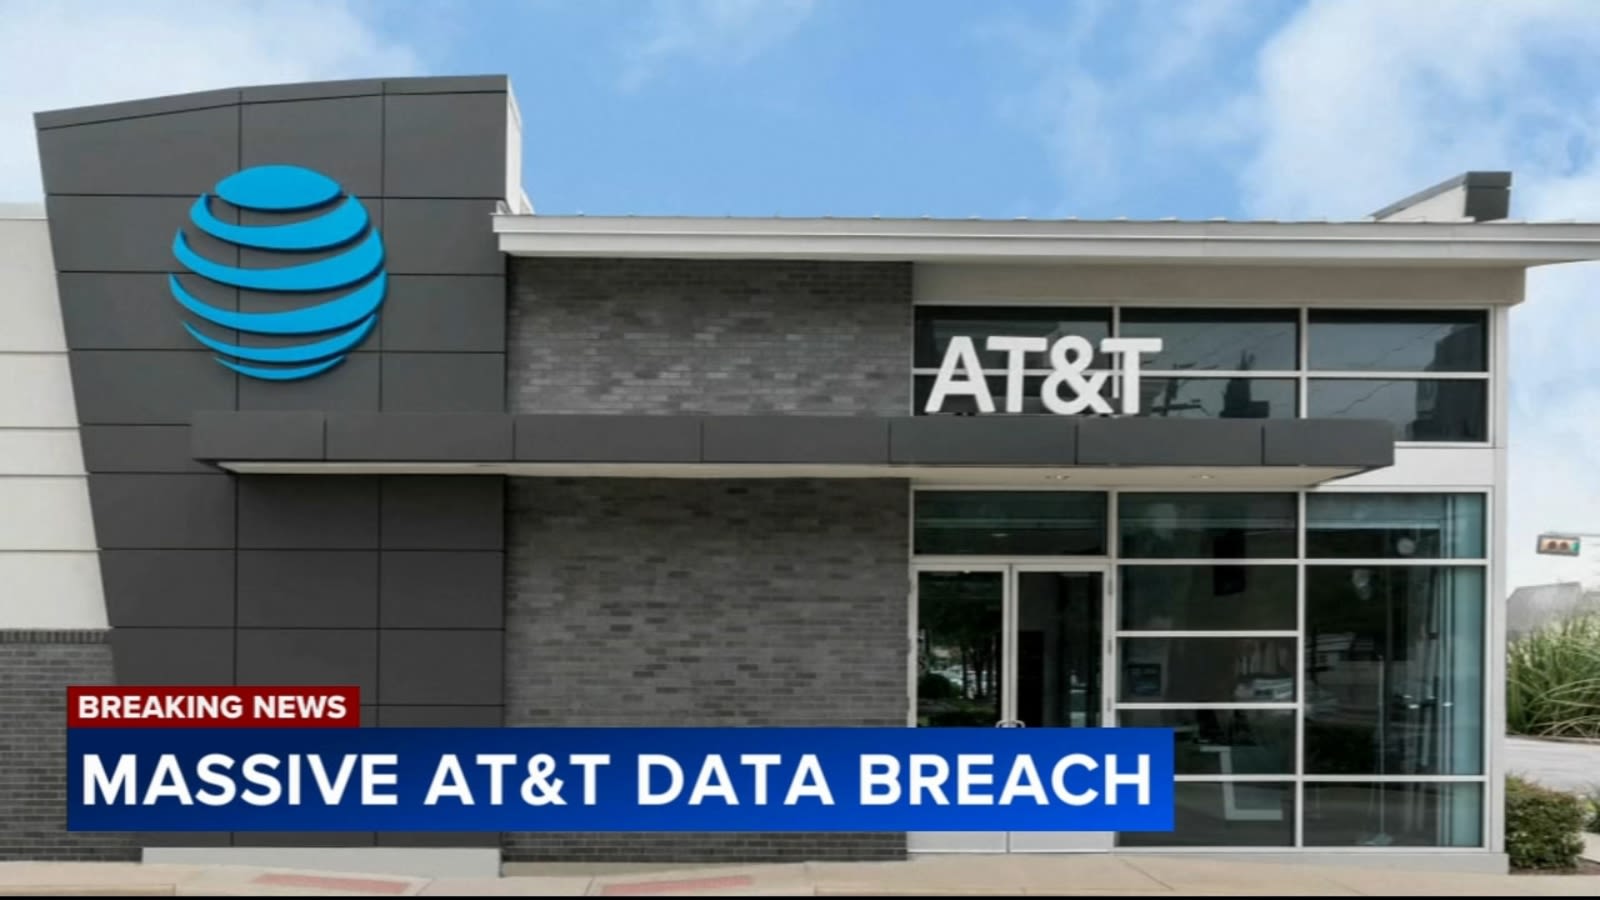 'Nearly all' AT&T cell customers' call and text records exposed in massive breach